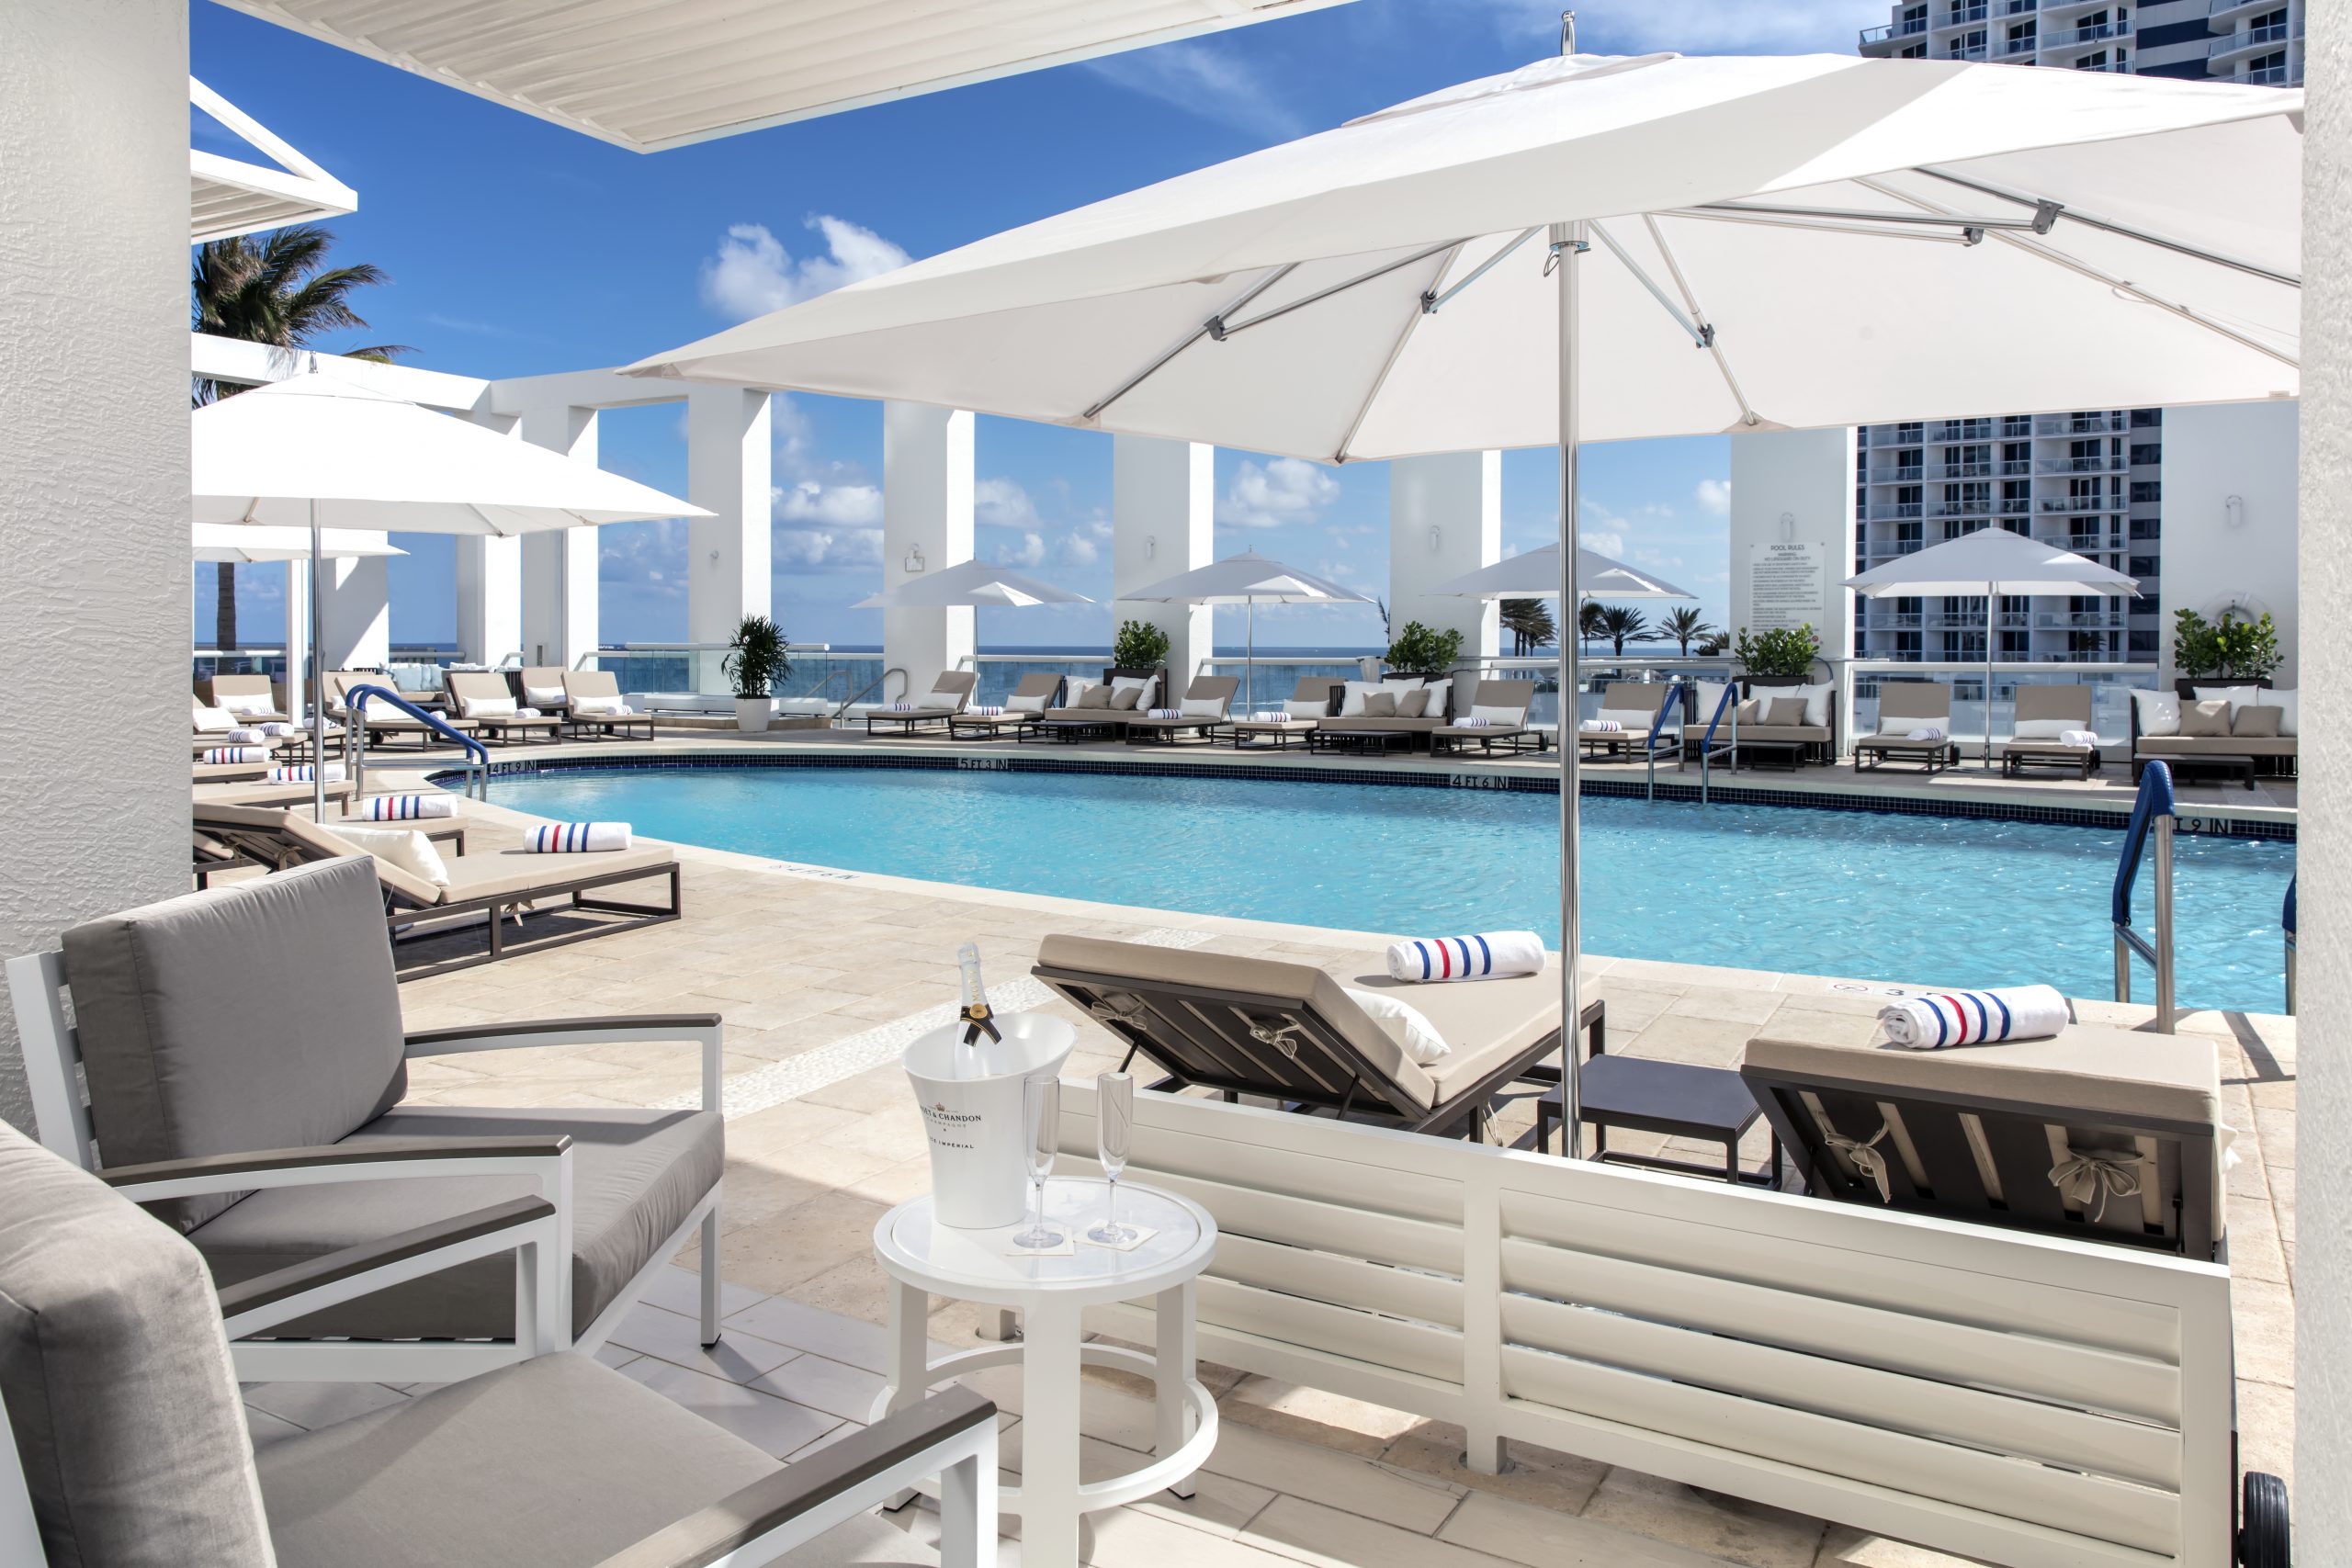 Luxury Condos Fort Lauderdale: Reasons to Buy Over a House